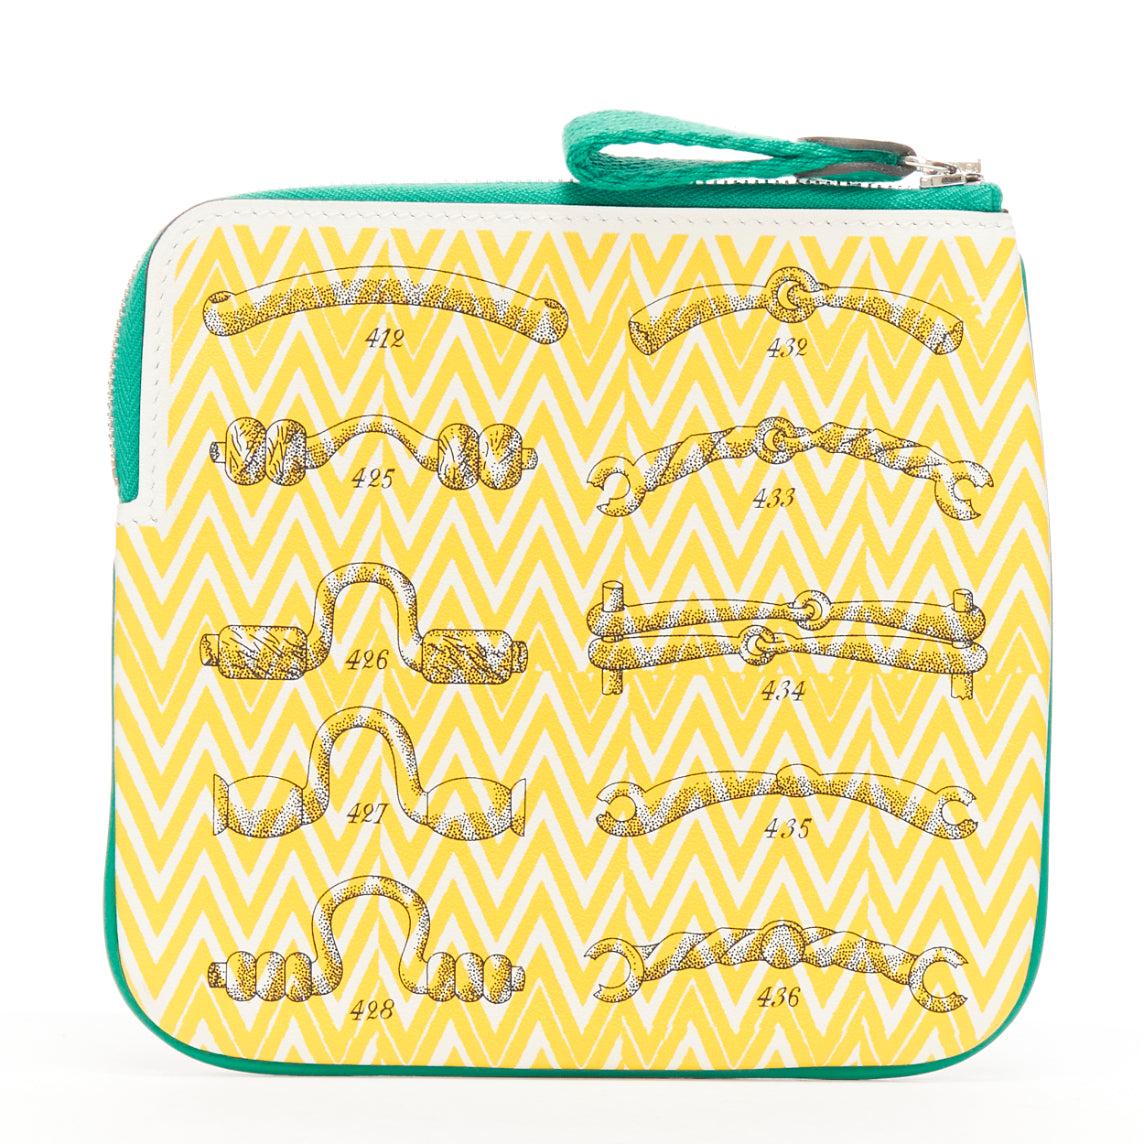 HERMES 2024 Carre Pocket Pouch Manufacture de Boucleries buckle print zip around wallet
Reference: AAWC/A00984
Brand: Hermes
Model: Carre pocket Pouch
Collection: 2024
Material: Leather
Color: Green, Multicolour
Pattern: Abstract
Closure: